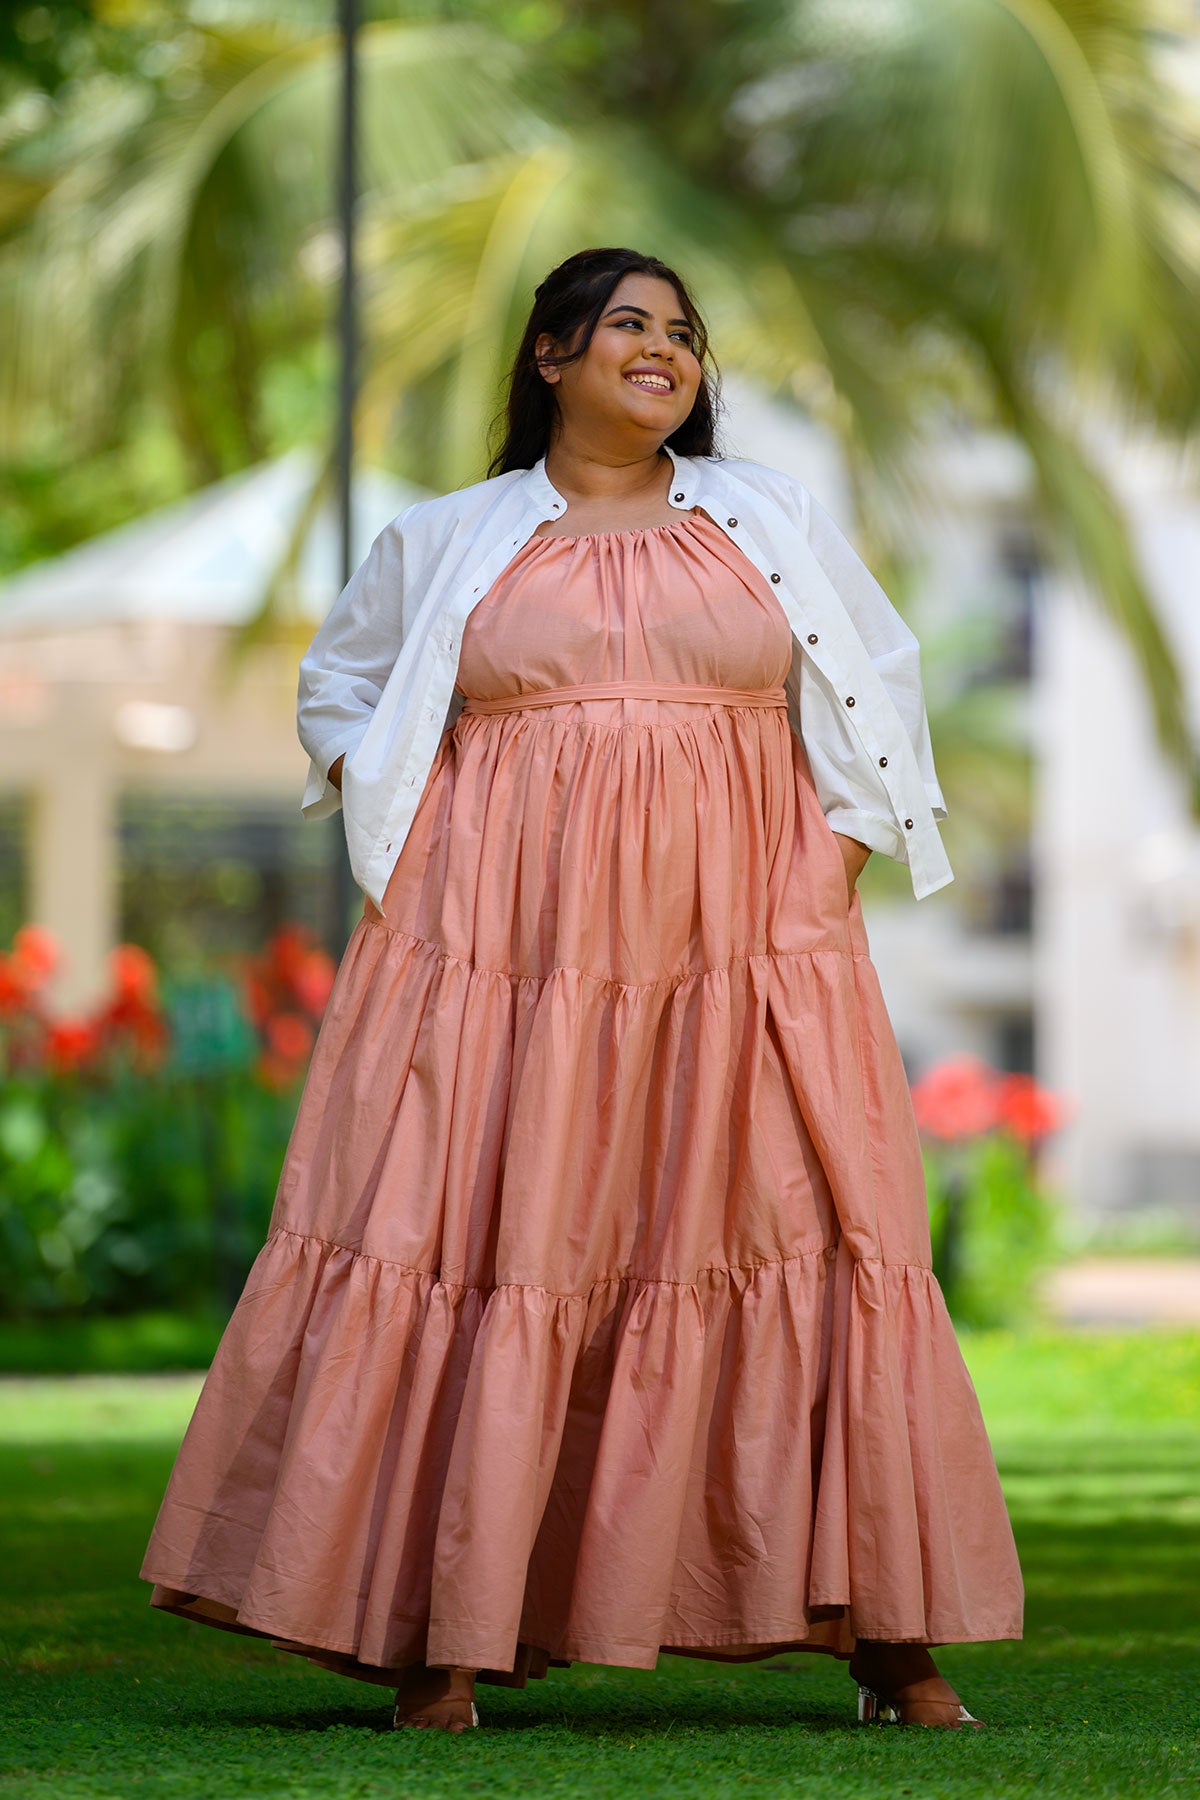 Rose tiered maxi with white cover-up shrug